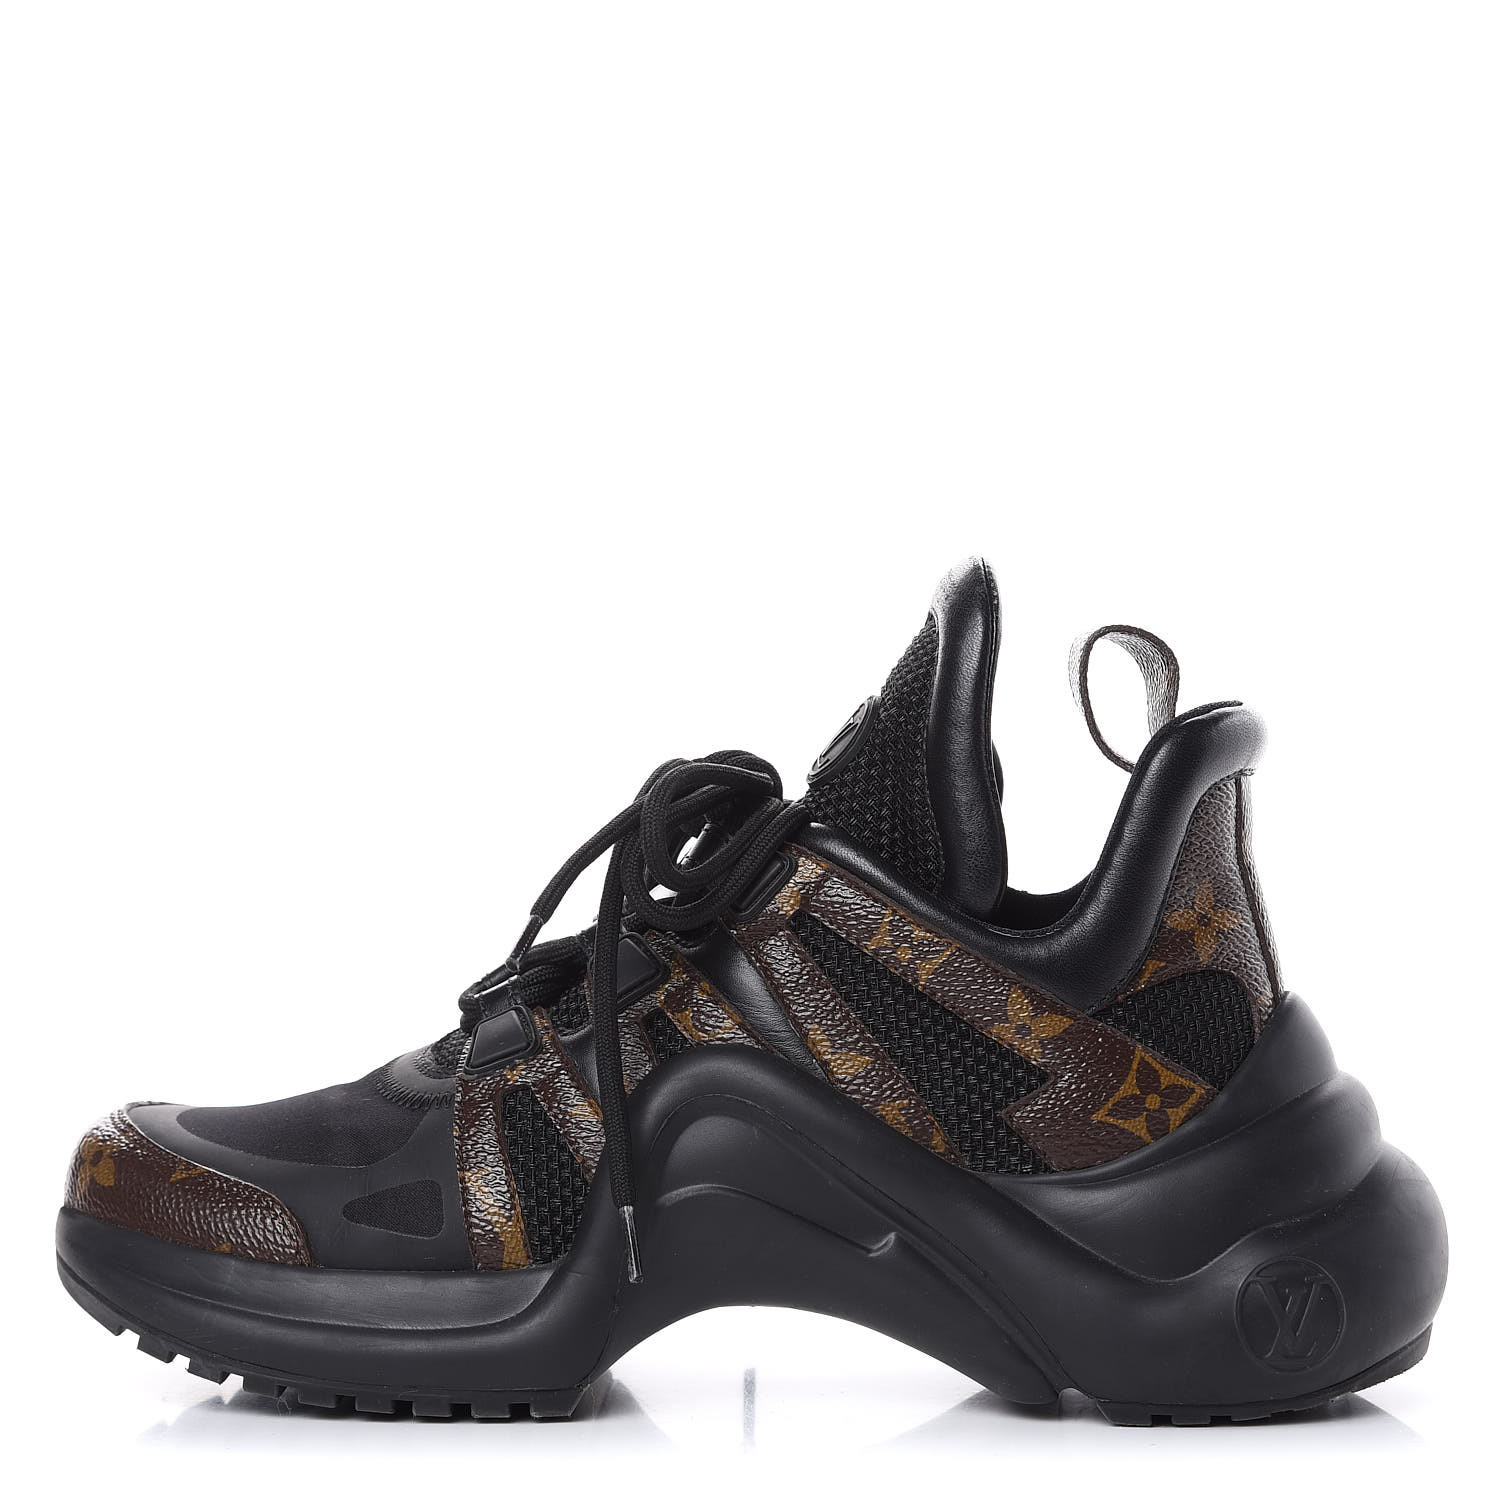 archlight sneakers louis vuitton price